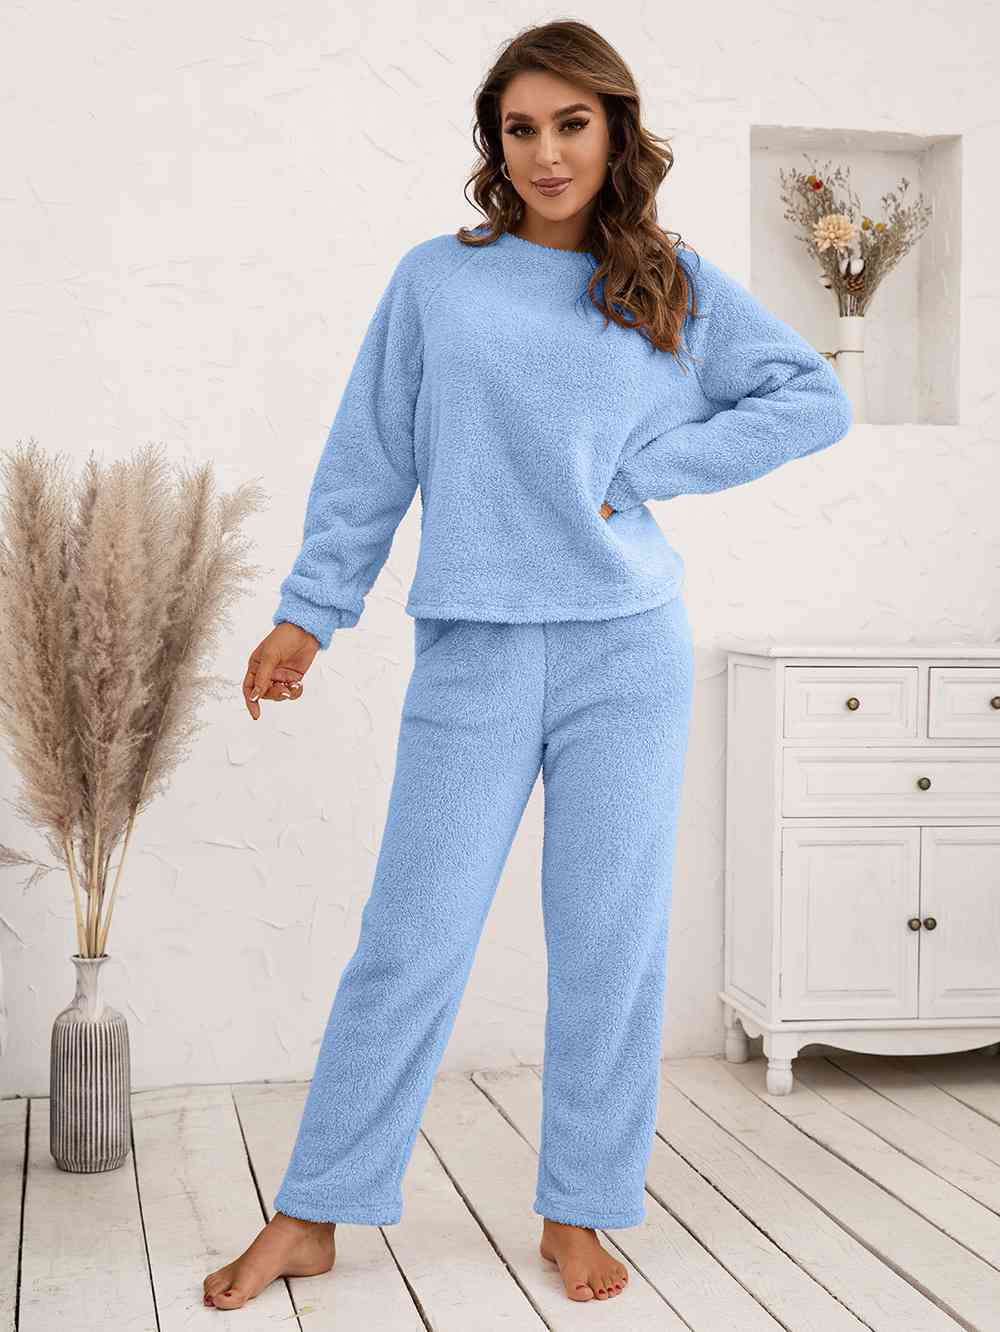 Teddy Long Sleeve Top and Pants Lounge Set (9 Colors) Loungewear Krazy Heart Designs Boutique Pastel  Blue S 